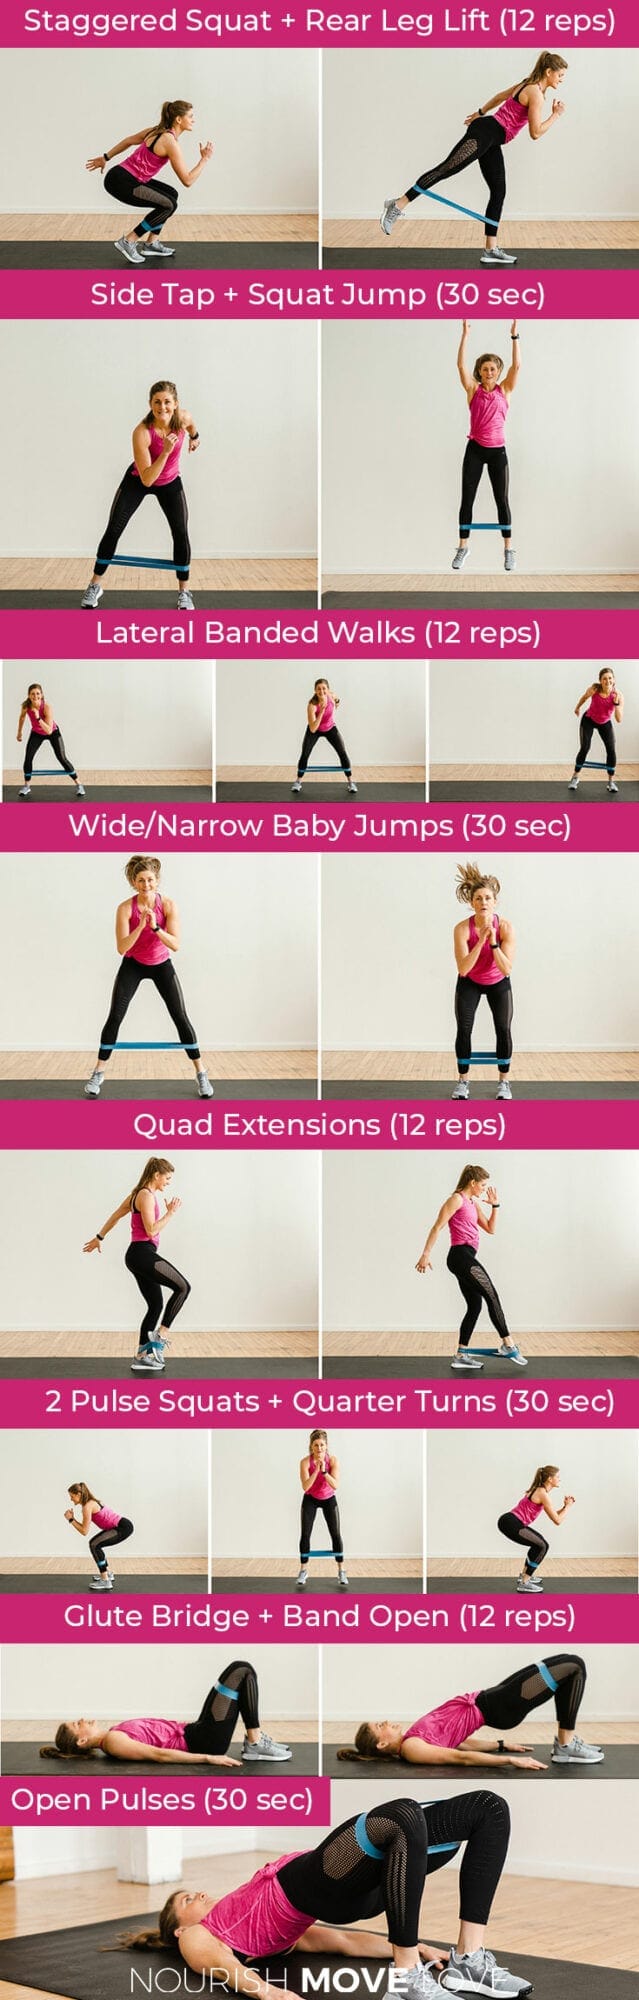 15 Minute Leg Workouts At Home With Bands for Women